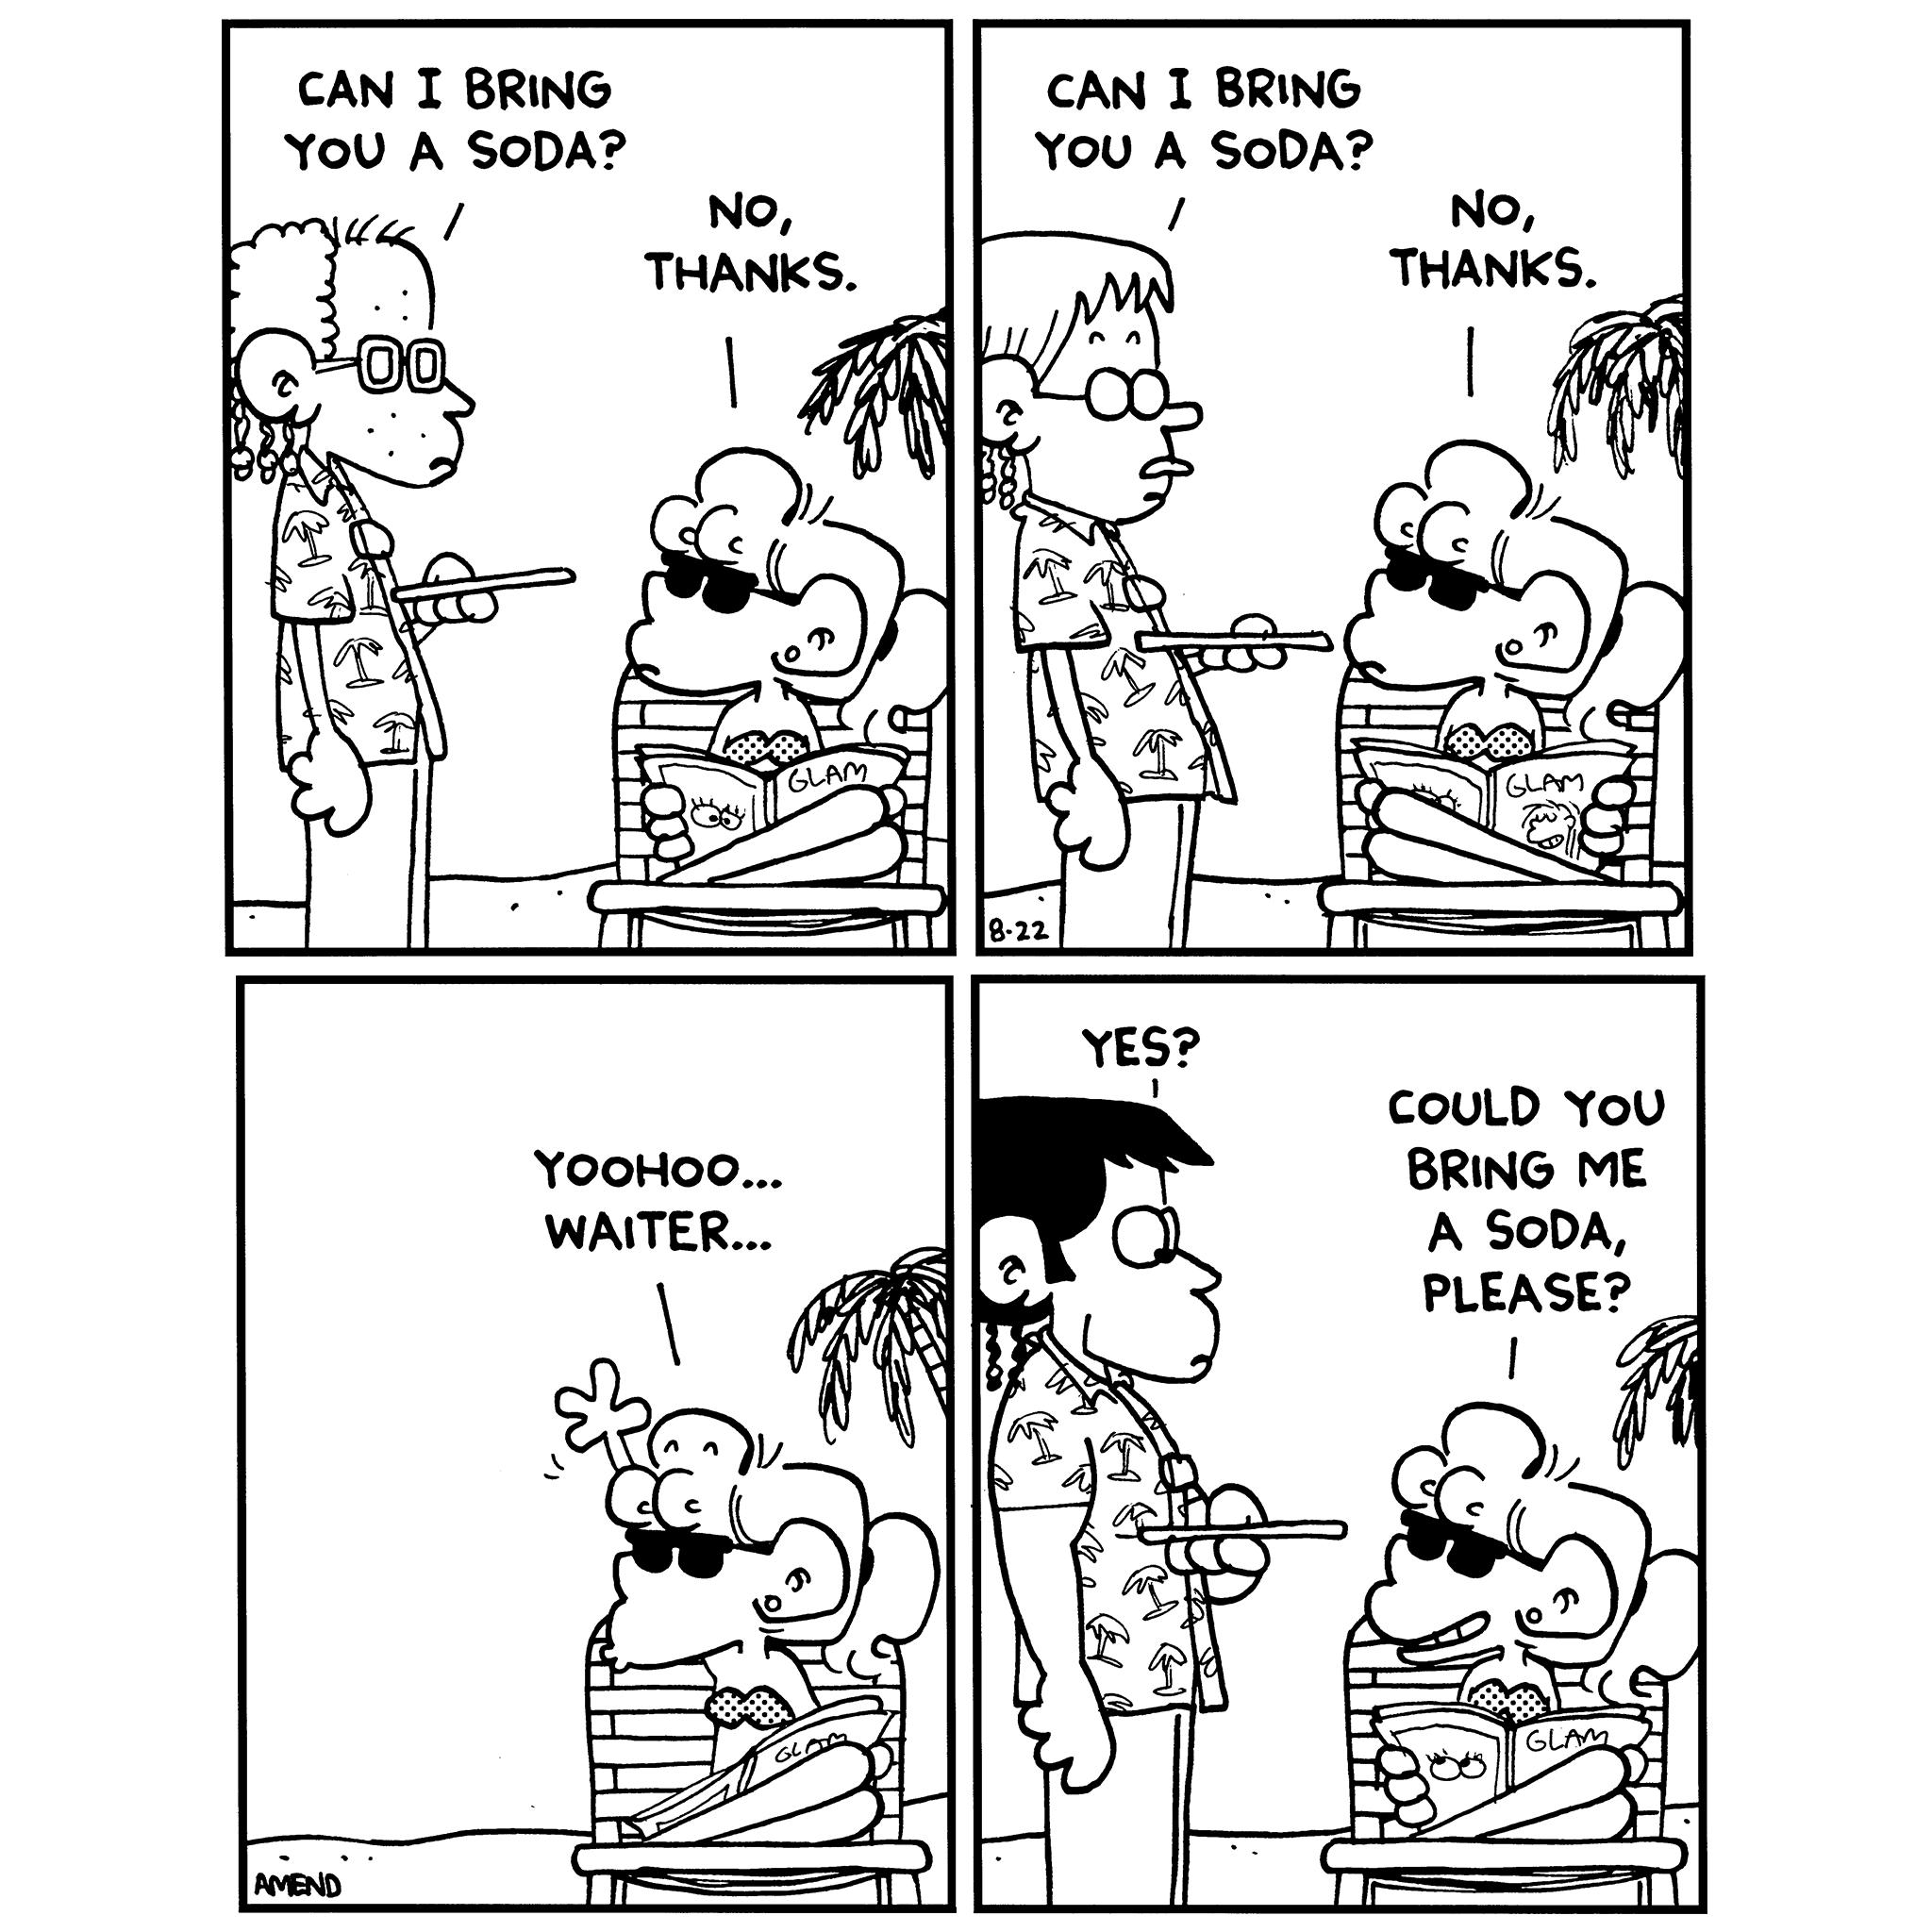 FoxTrot comic strip by Bill Amend - August 22, 2001 - Caribbeanny Vacation